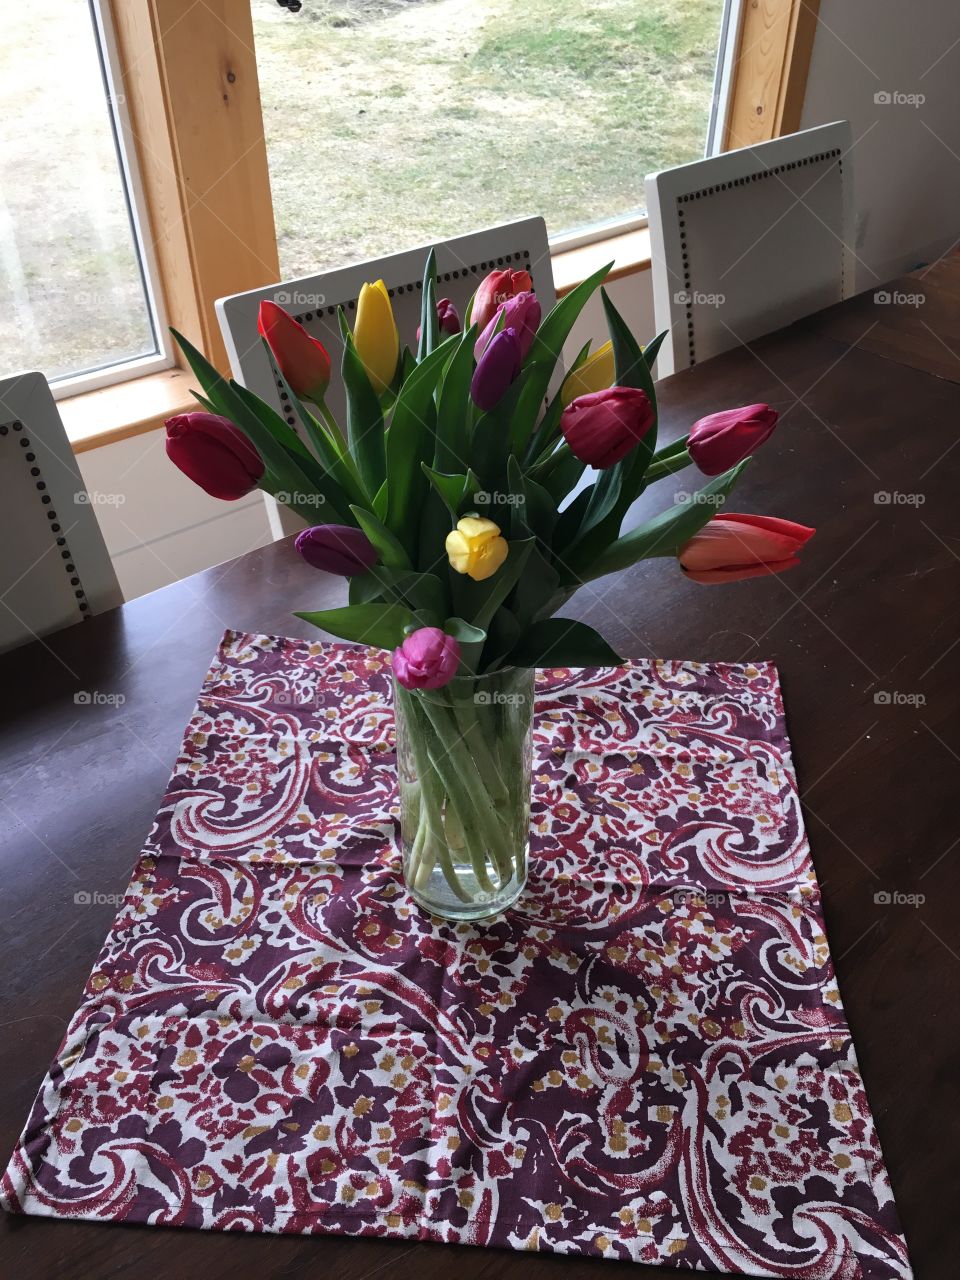 Birthday tulips from my husband. 
March 1st I will turn 27. 